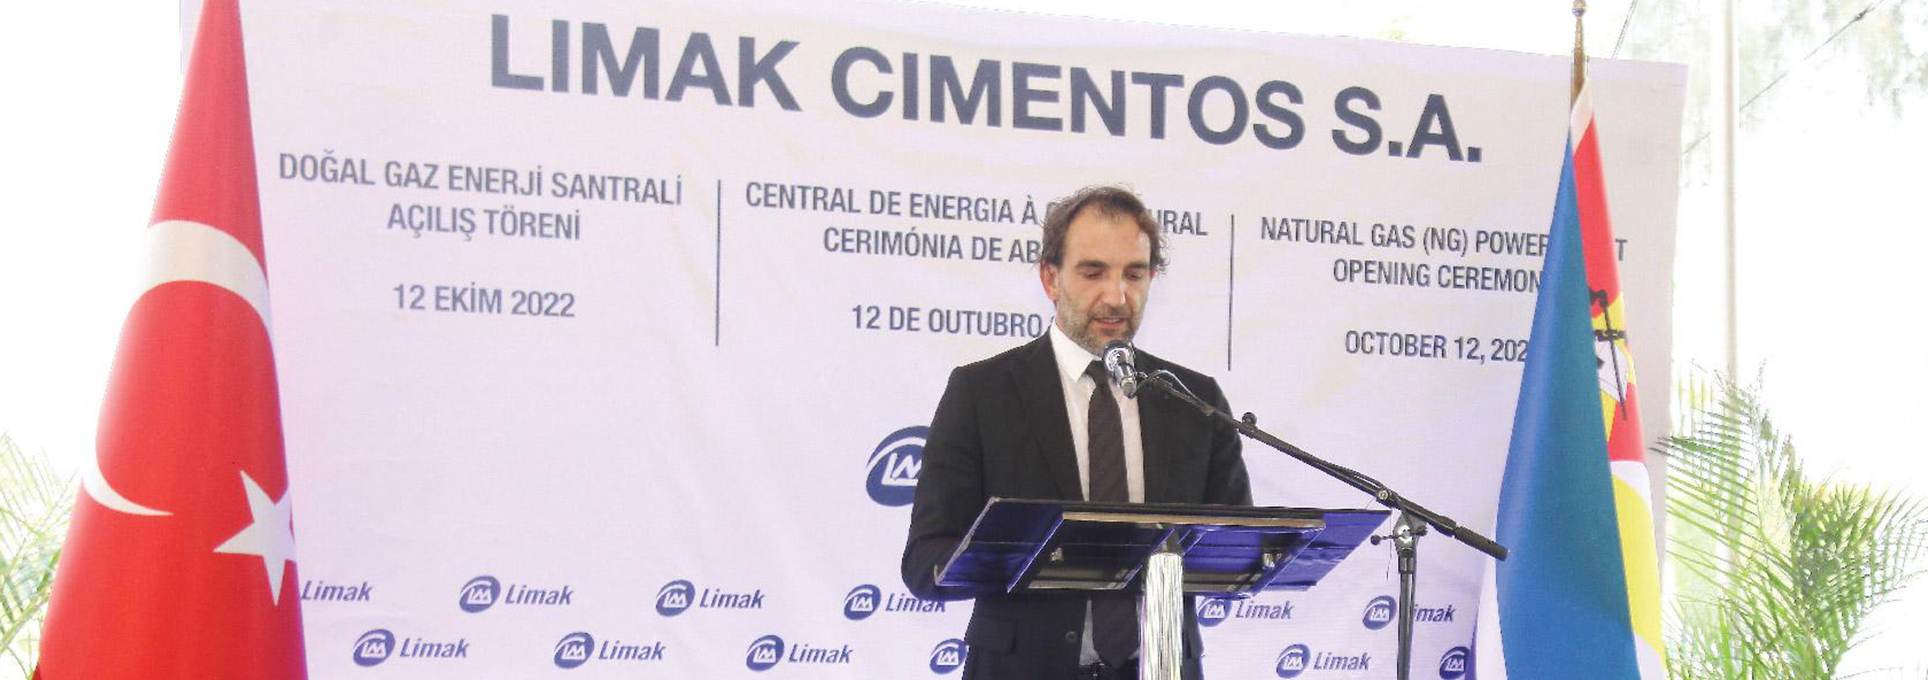 The clean energy project, of which the investment was realized in line with the 2050 Net Zero Carbon target of the Limak Cement Group, was opened in Mozambique on October 12.